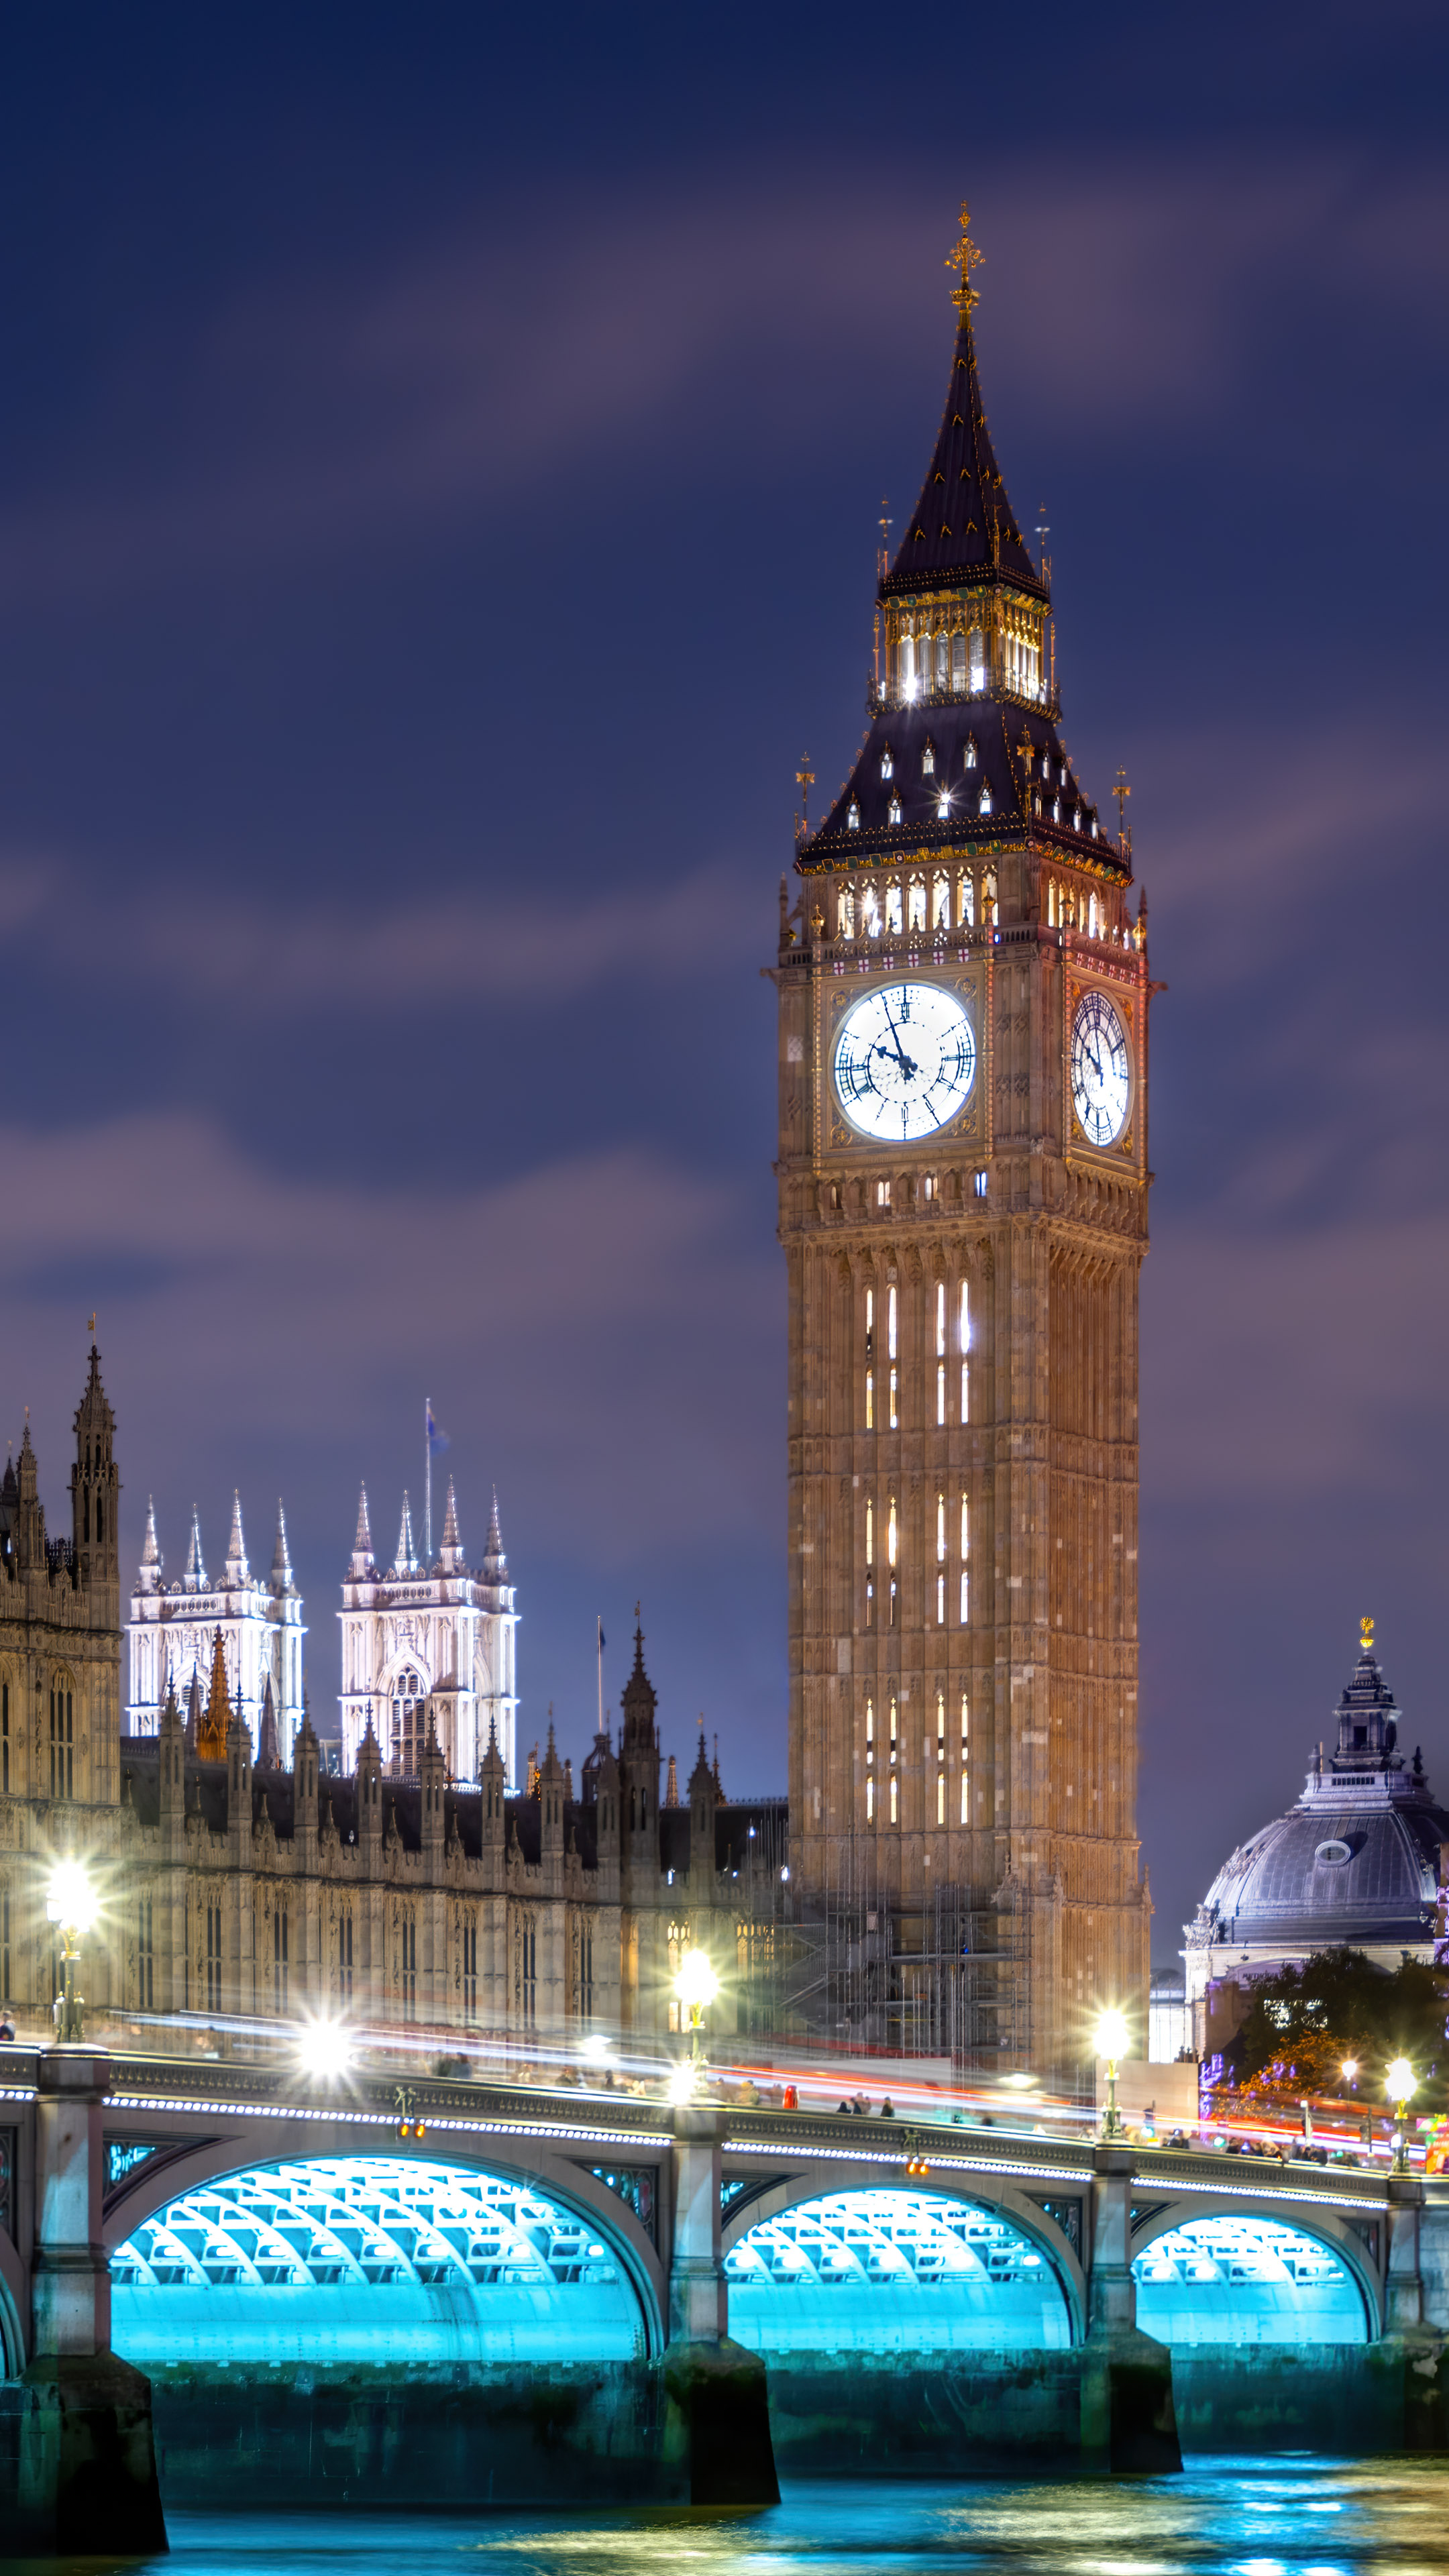 Enjoy the iconic view of London Big Ben and Westminster Bridge at night with this mobile wallpaper.